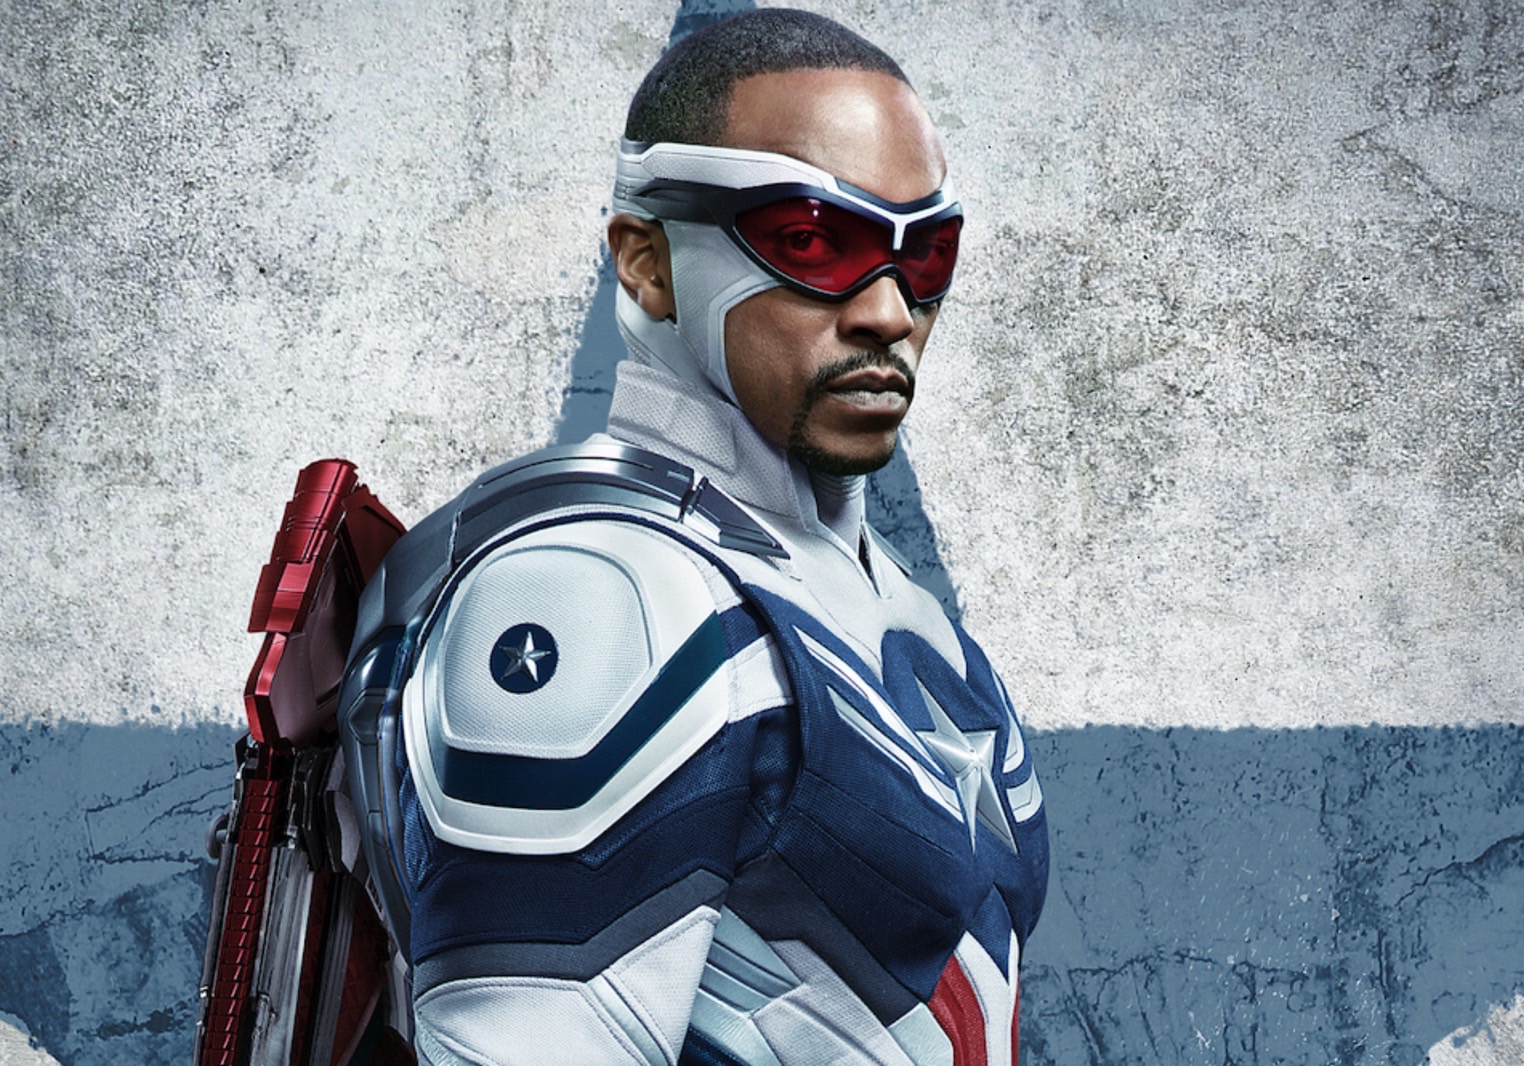 Falcon The New Captain America Wallpapers